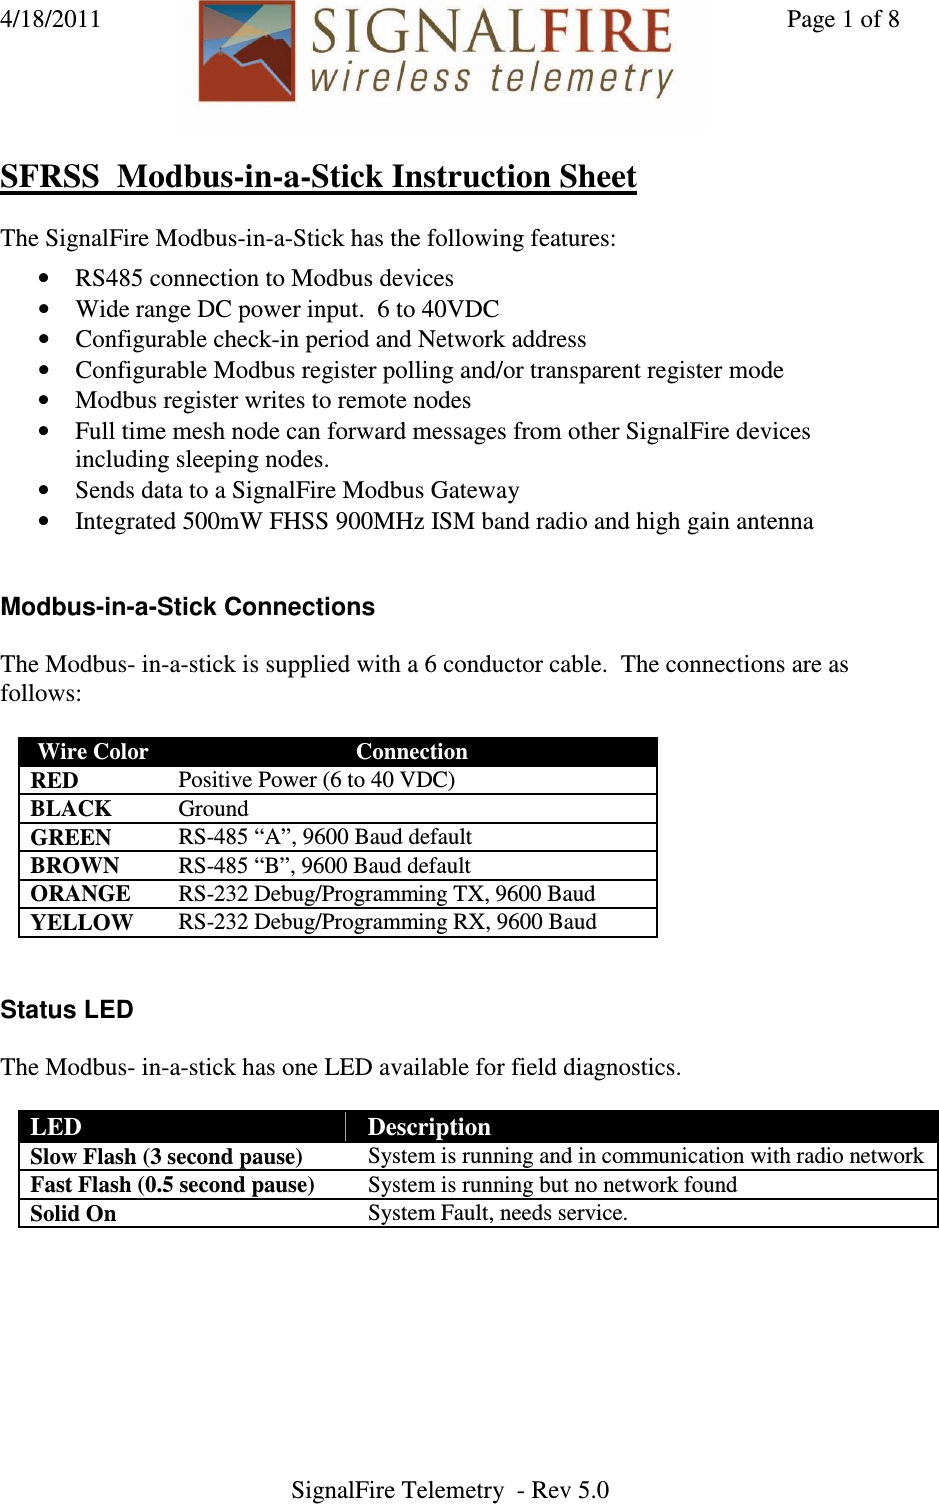 4/18/2011    Page 1 of 8 SignalFire Telemetry  - Rev 5.0   SFRSS  Modbus-in-a-Stick Instruction Sheet  The SignalFire Modbus-in-a-Stick has the following features:  • RS485 connection to Modbus devices • Wide range DC power input.  6 to 40VDC • Configurable check-in period and Network address • Configurable Modbus register polling and/or transparent register mode • Modbus register writes to remote nodes • Full time mesh node can forward messages from other SignalFire devices including sleeping nodes.  • Sends data to a SignalFire Modbus Gateway • Integrated 500mW FHSS 900MHz ISM band radio and high gain antenna   Modbus-in-a-Stick Connections  The Modbus- in-a-stick is supplied with a 6 conductor cable.  The connections are as follows:  Wire Color  Connection RED  Positive Power (6 to 40 VDC) BLACK  Ground GREEN  RS-485 “A”, 9600 Baud default BROWN  RS-485 “B”, 9600 Baud default ORANGE  RS-232 Debug/Programming TX, 9600 Baud YELLOW  RS-232 Debug/Programming RX, 9600 Baud    Status LED  The Modbus- in-a-stick has one LED available for field diagnostics.    LED  Description Slow Flash (3 second pause)  System is running and in communication with radio network Fast Flash (0.5 second pause)  System is running but no network found Solid On  System Fault, needs service. 